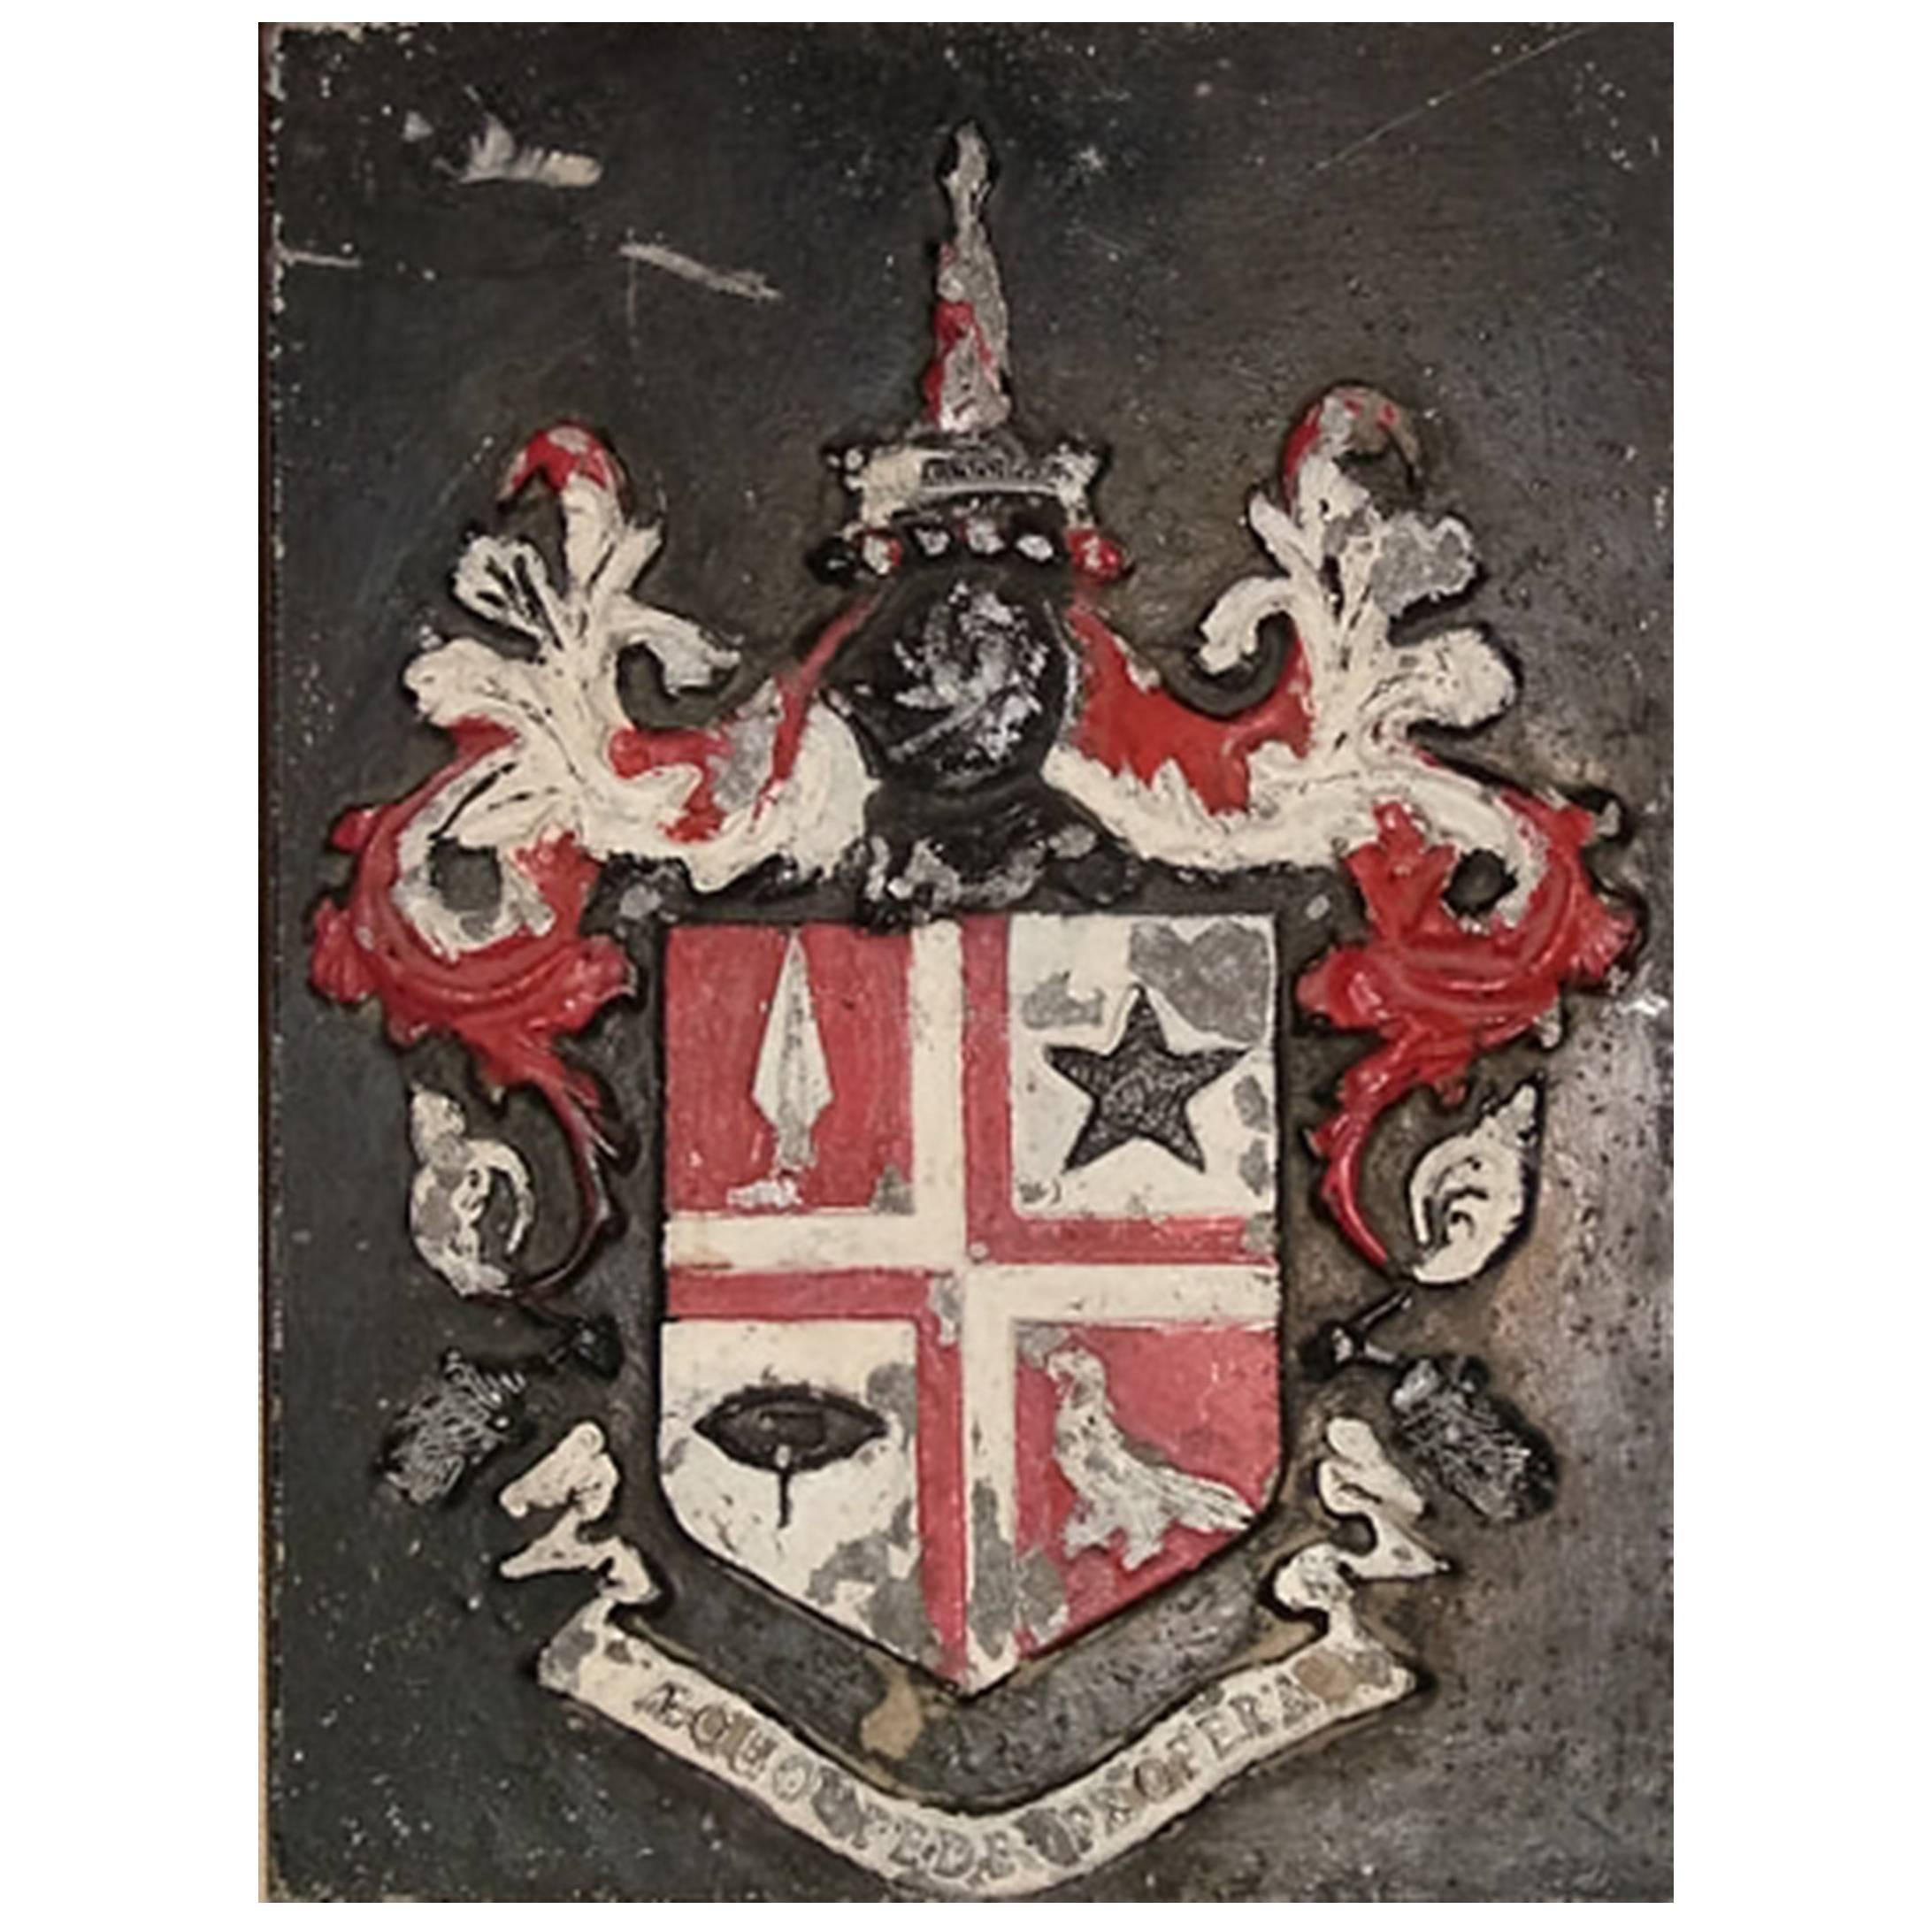 Coat of Arms Cast Iron Wall Plaque, Late 18th-Early 19th Century